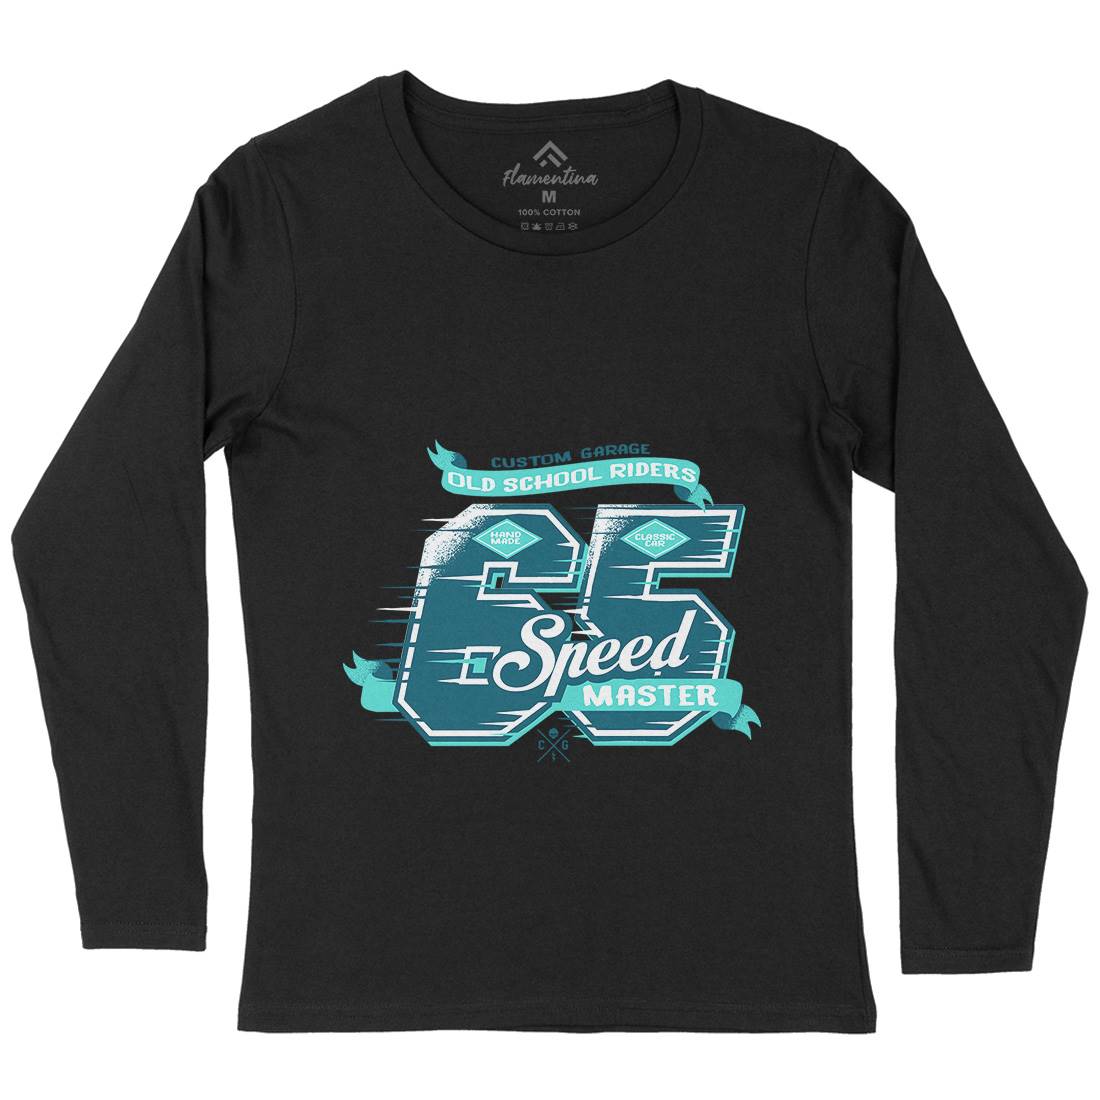 65 Speed Womens Long Sleeve T-Shirt Motorcycles A982